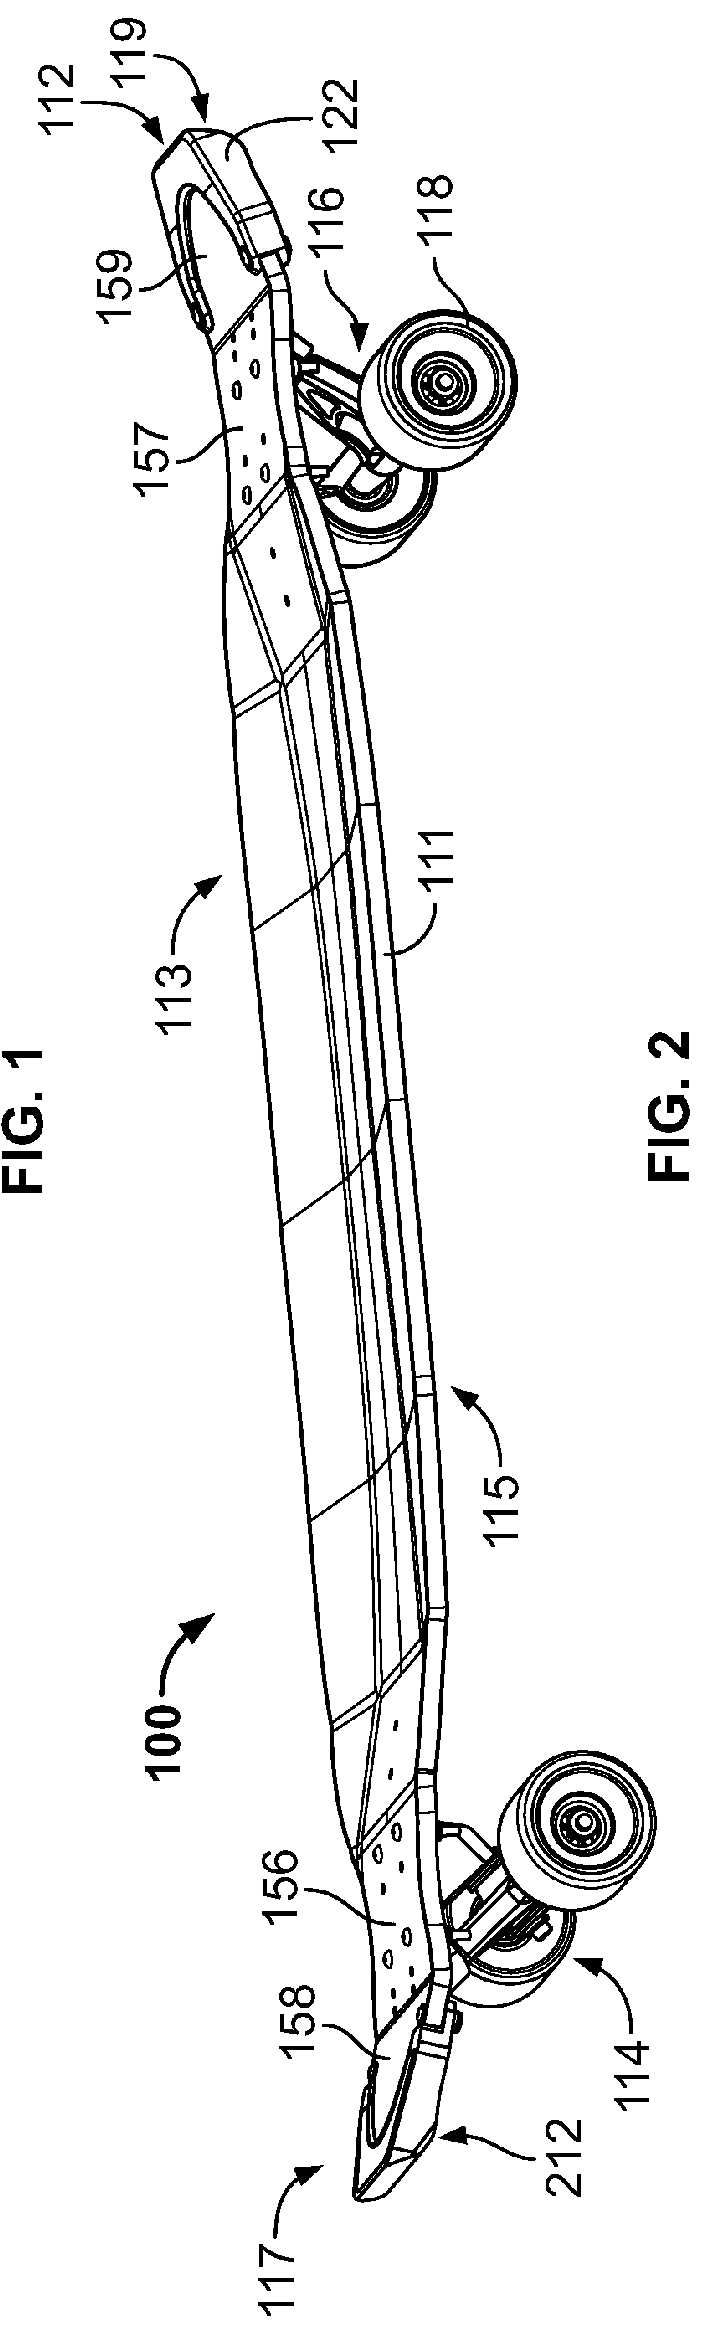 Noseguard assemblies for skateboards and related methods of use